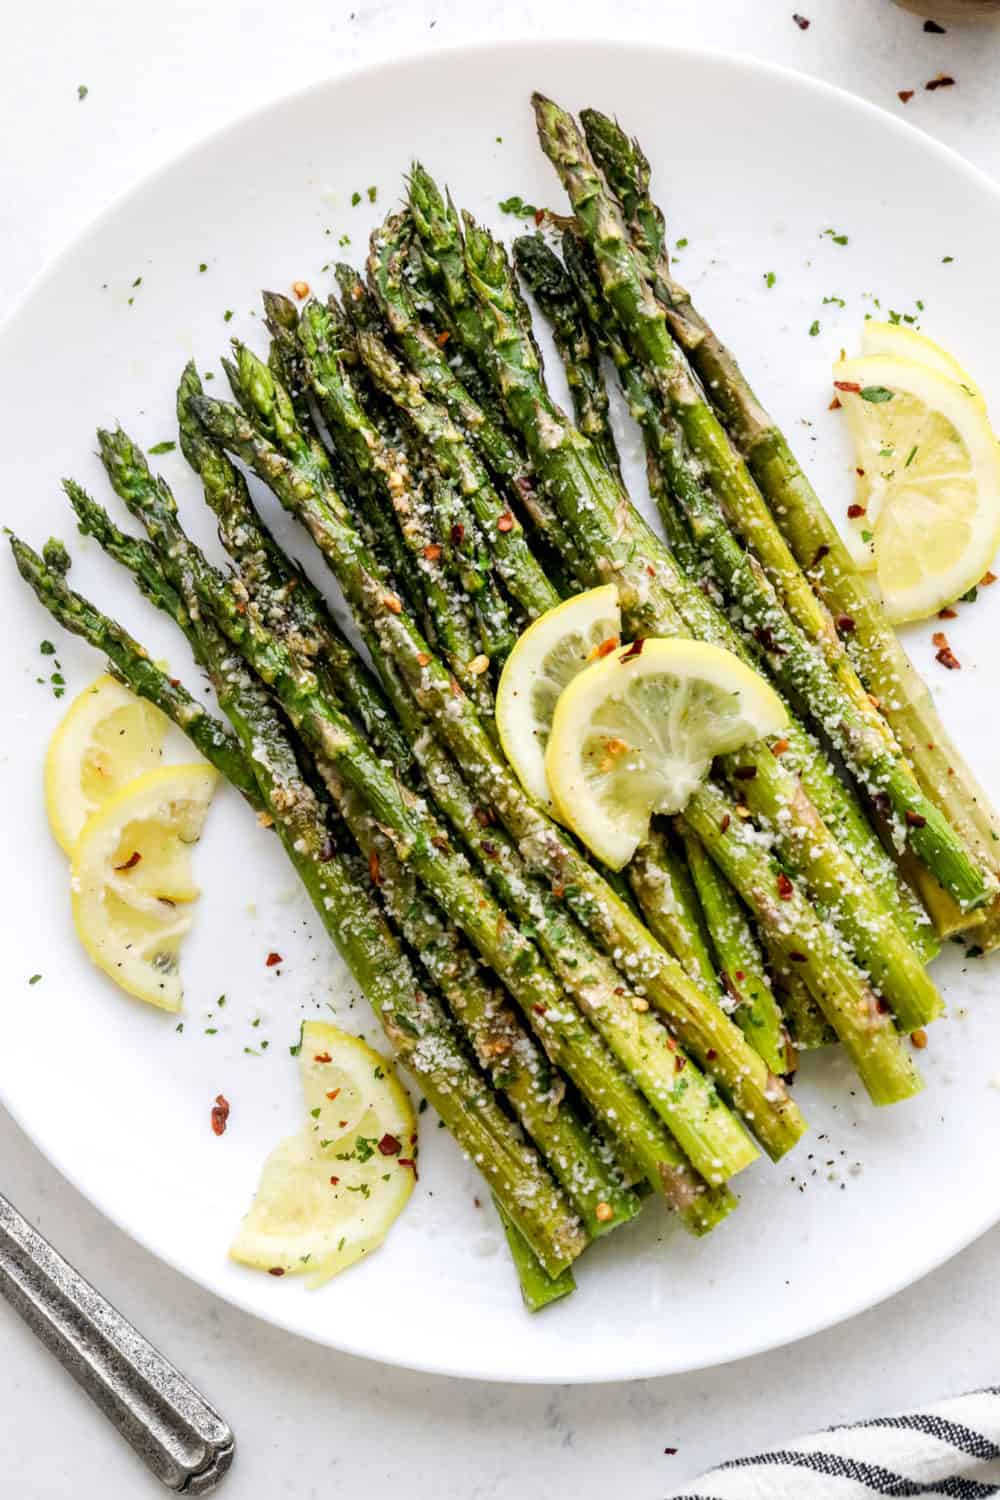 Cooked asparagus in a pile on a round white plate with sliced lemon laying on top of it